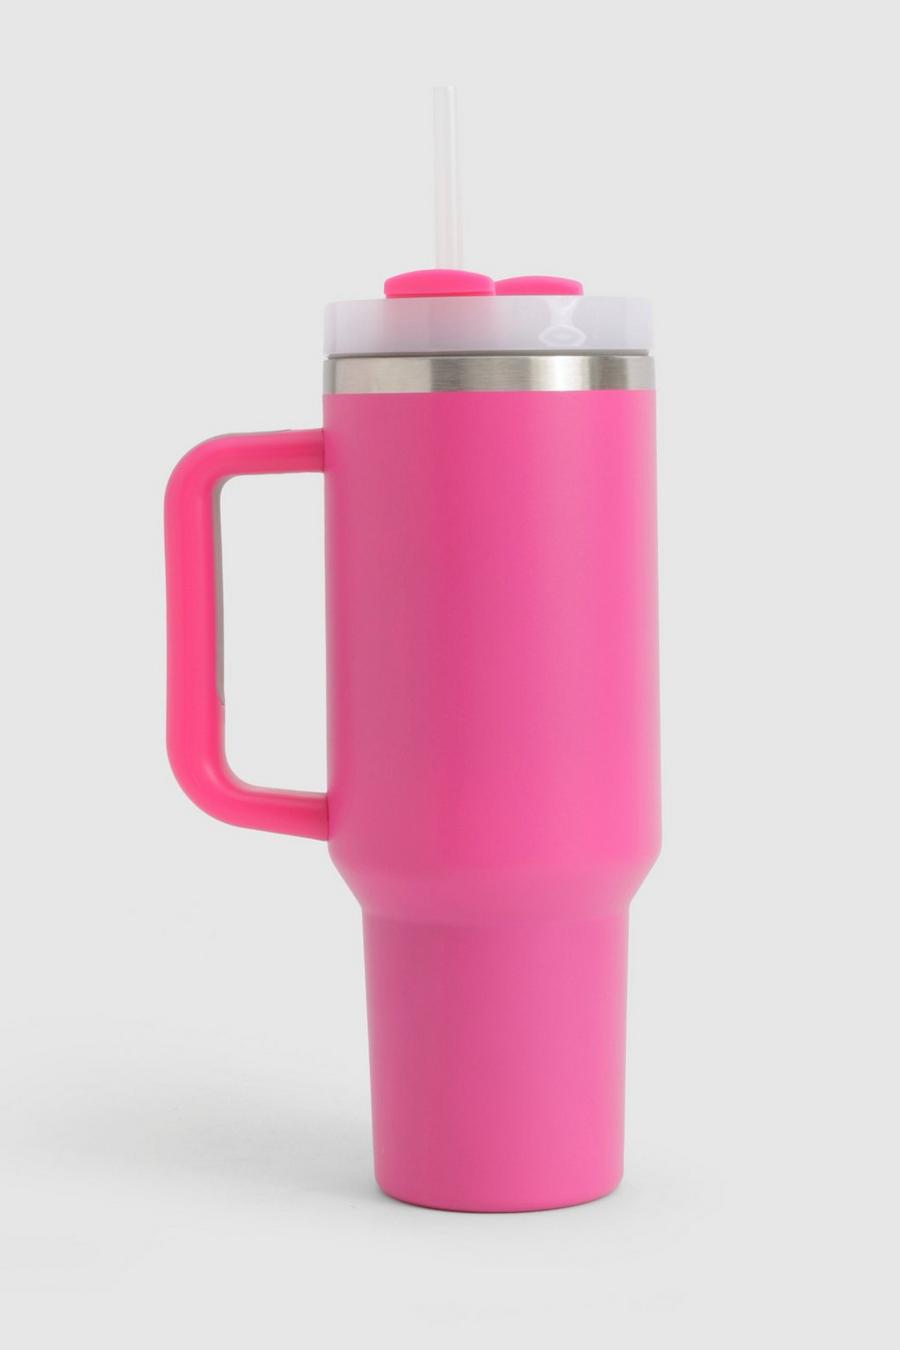 Bright pink Grote Roestvrij Stalen Tumbler Cup